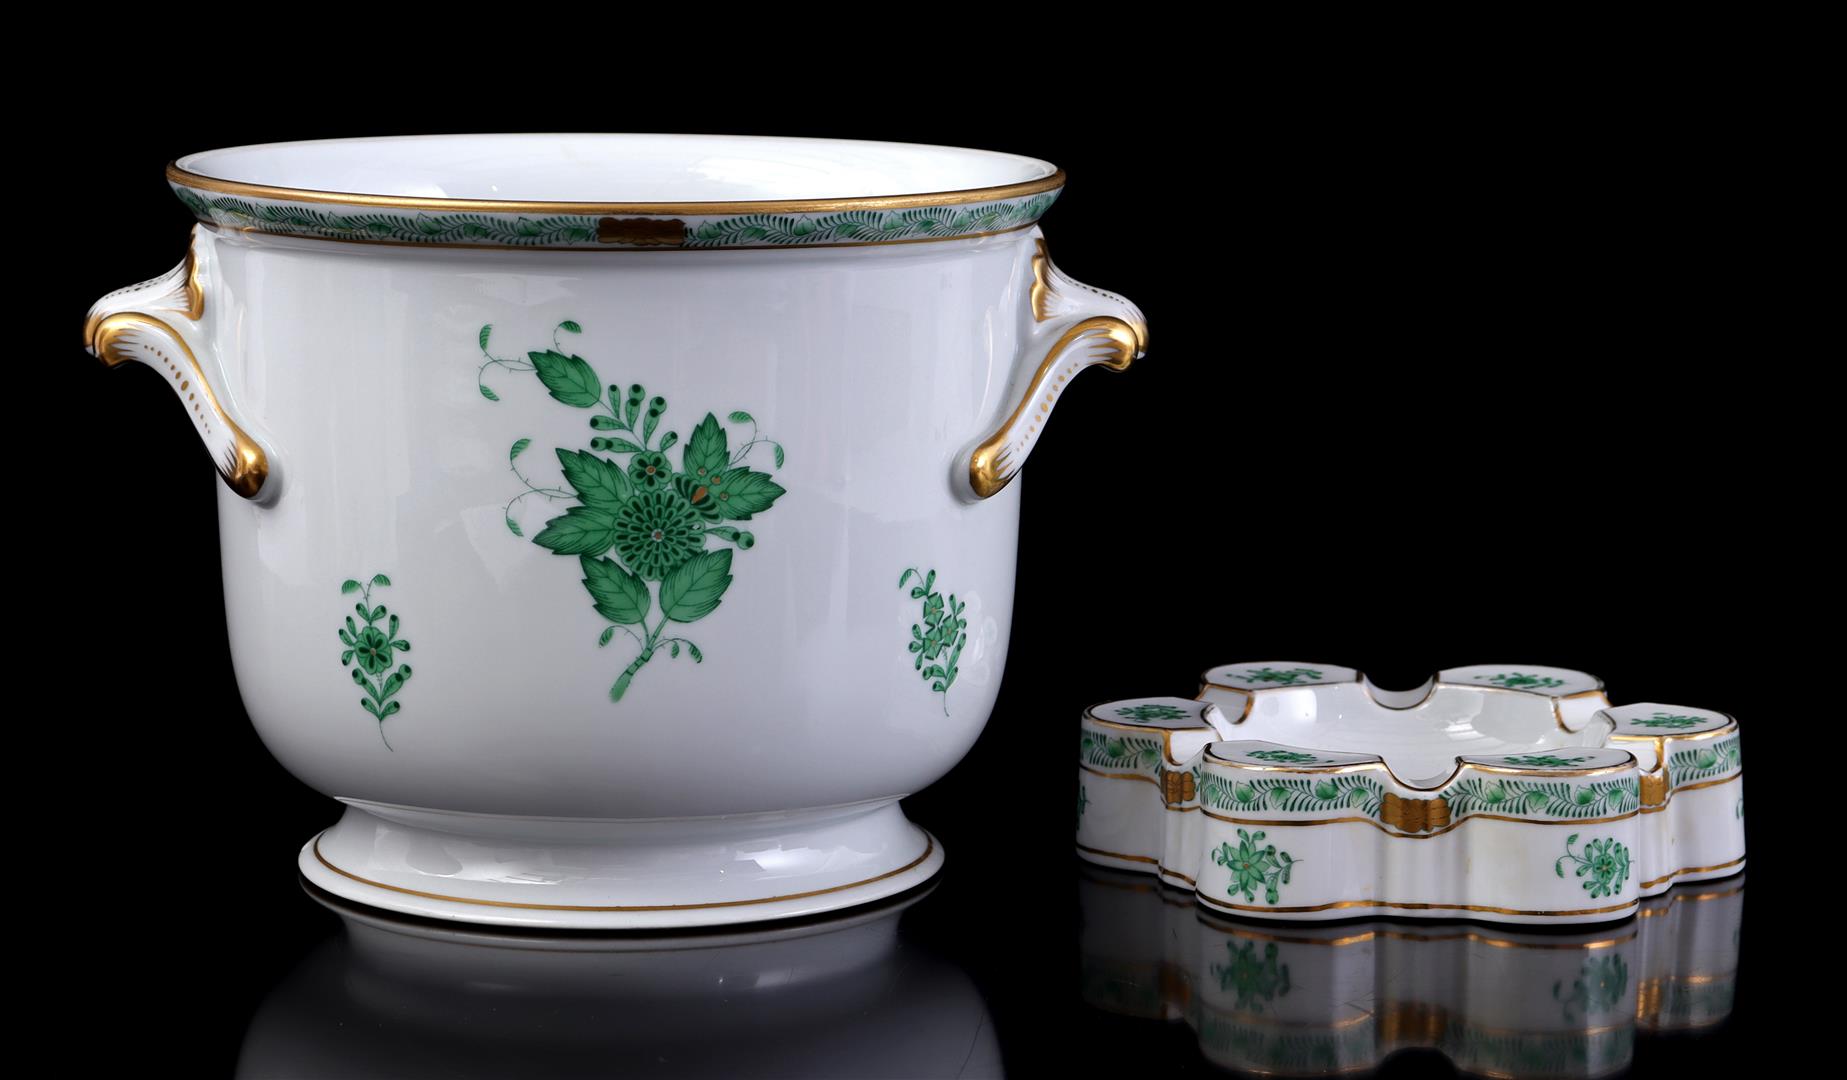 Herend Hungary porcelain